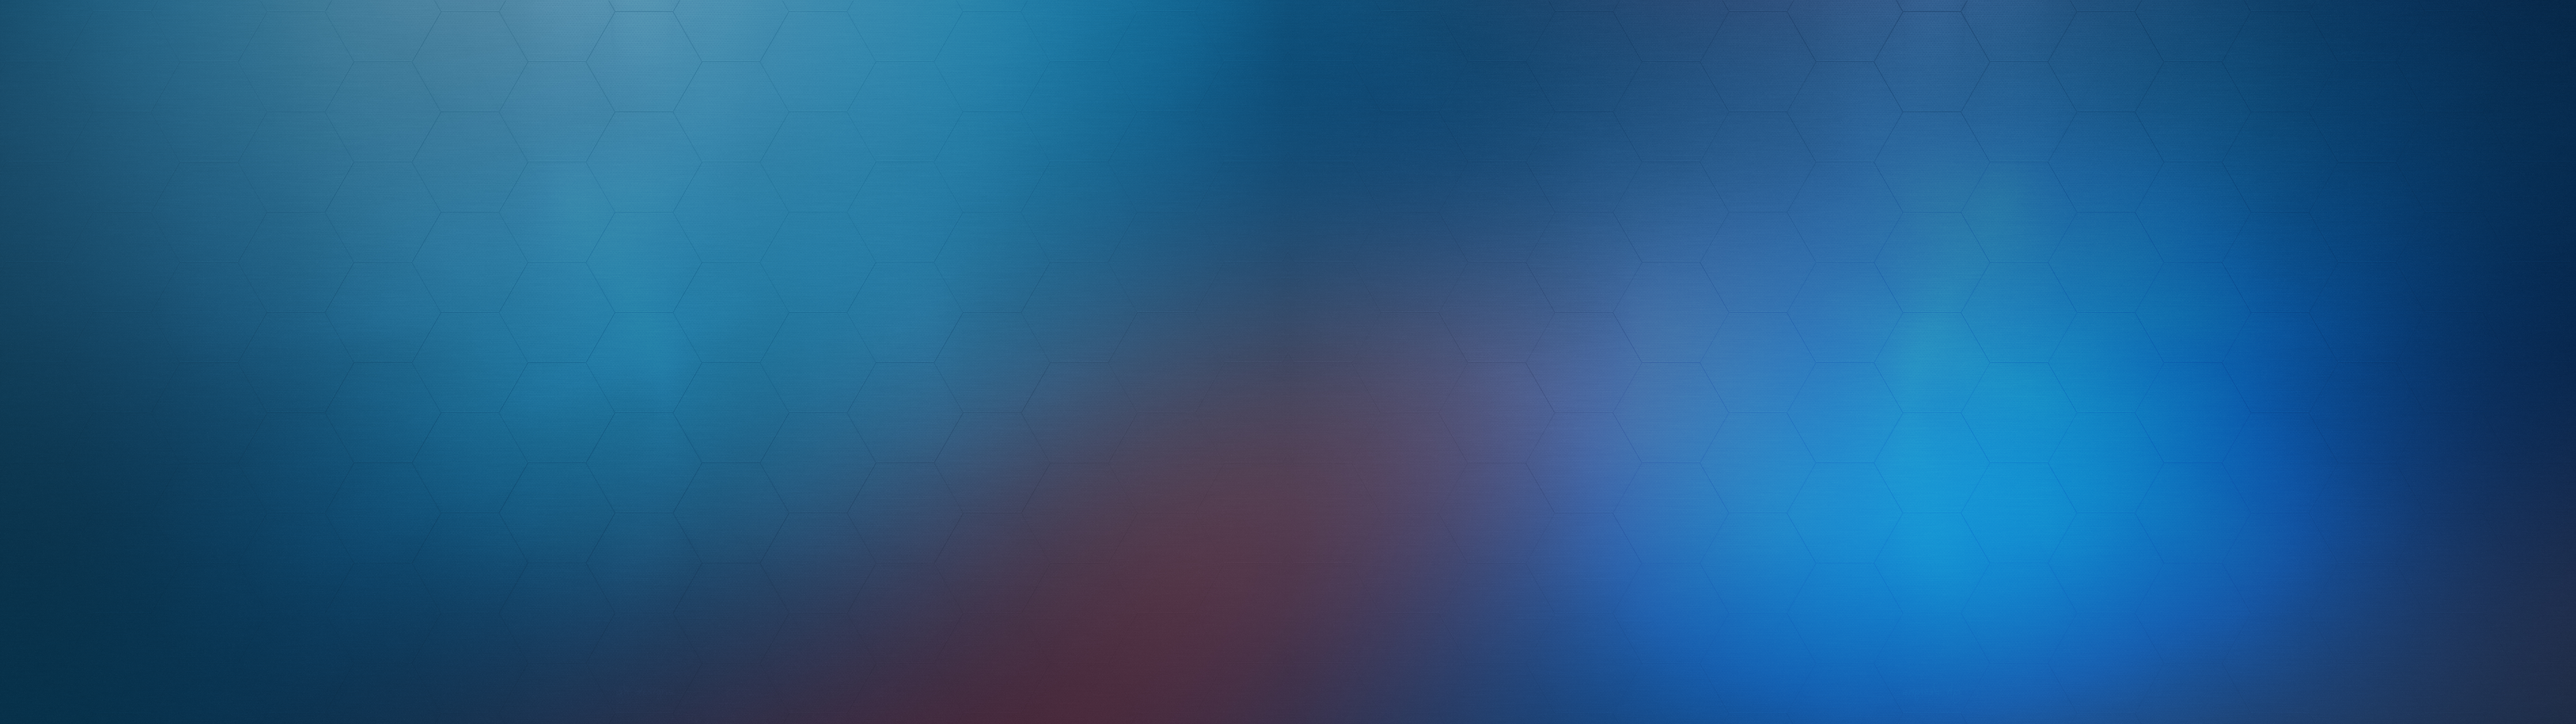 Dual Monitors Dual Display Abstract Minimalism Hex Starkiteckt Simple Background 7680x2160